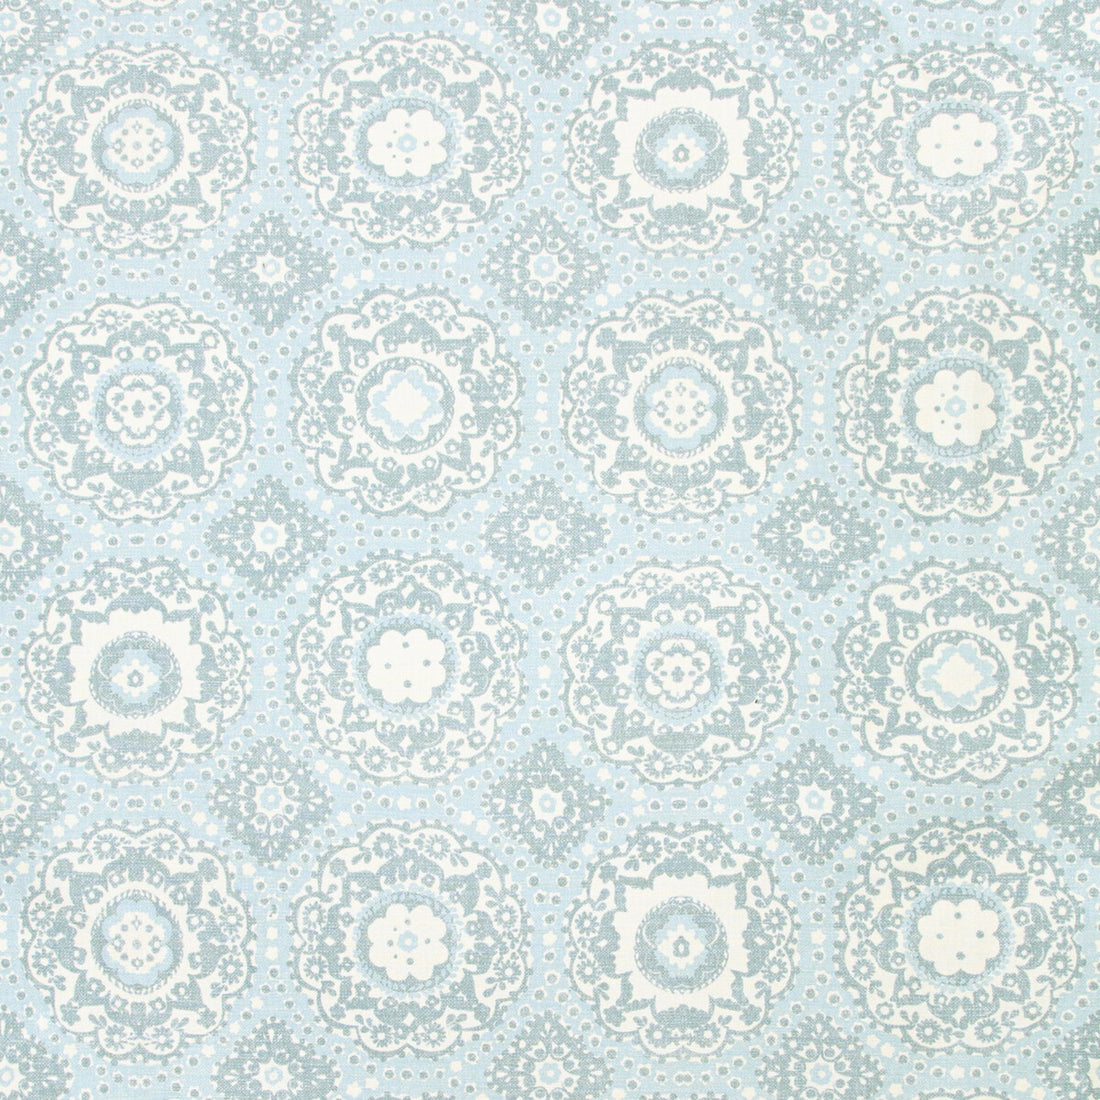 Bayview Print fabric in aqua color - pattern 2020190.13.0 - by Lee Jofa in the Avondale collection